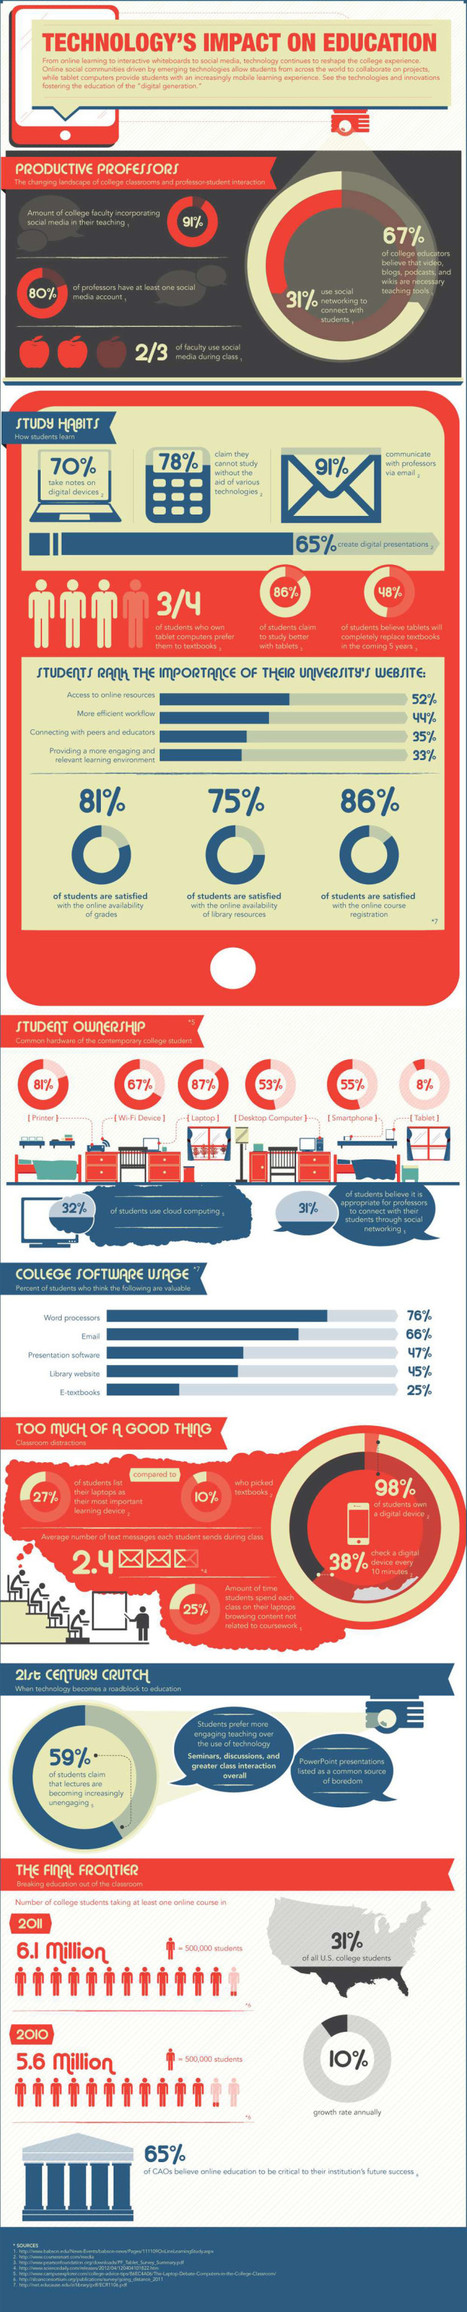 A Snapshot Of How Technology Is Used In Education [Infographic] | Strictly pedagogical | Scoop.it